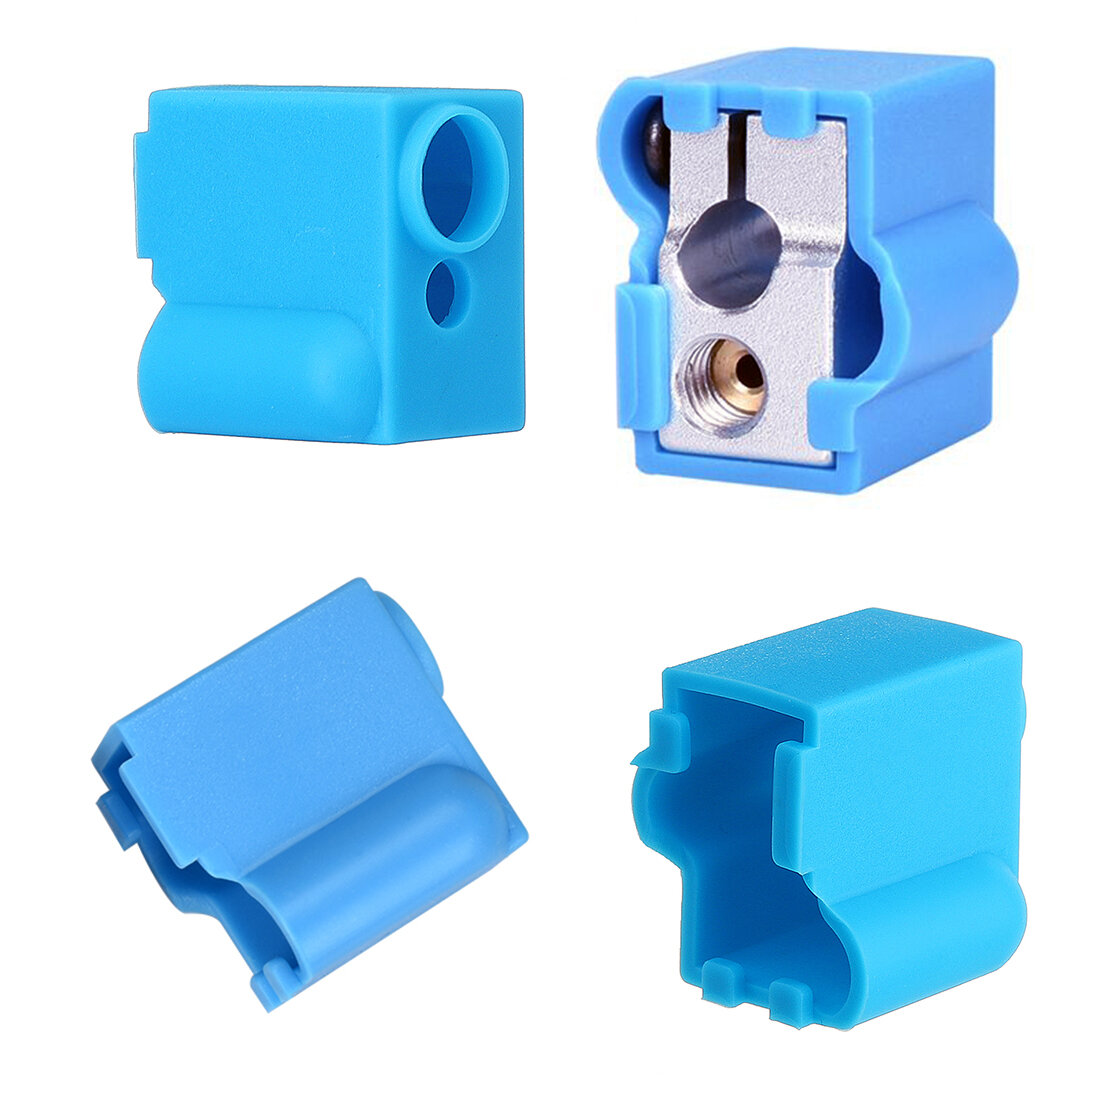 Blue Silicone Volcano Heating Block Protective Case for 3D Printer Part V6 Hotend